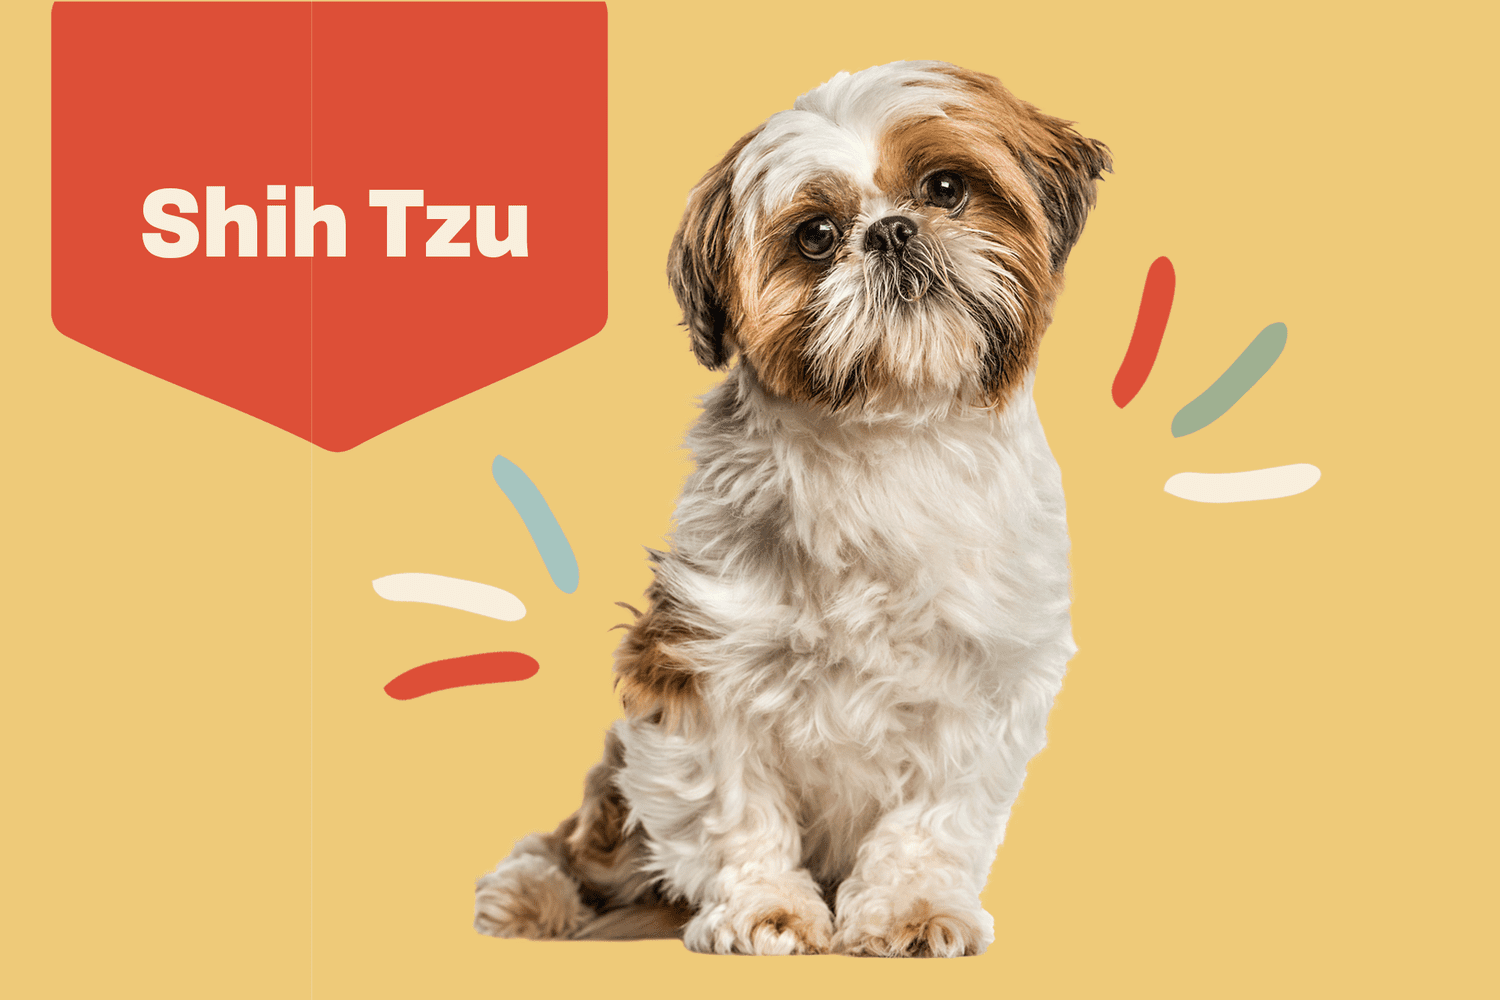 The Complete Guide to Caring for Shih Tzu Dogs: Tips and Tricks for a Happy Furry Friend